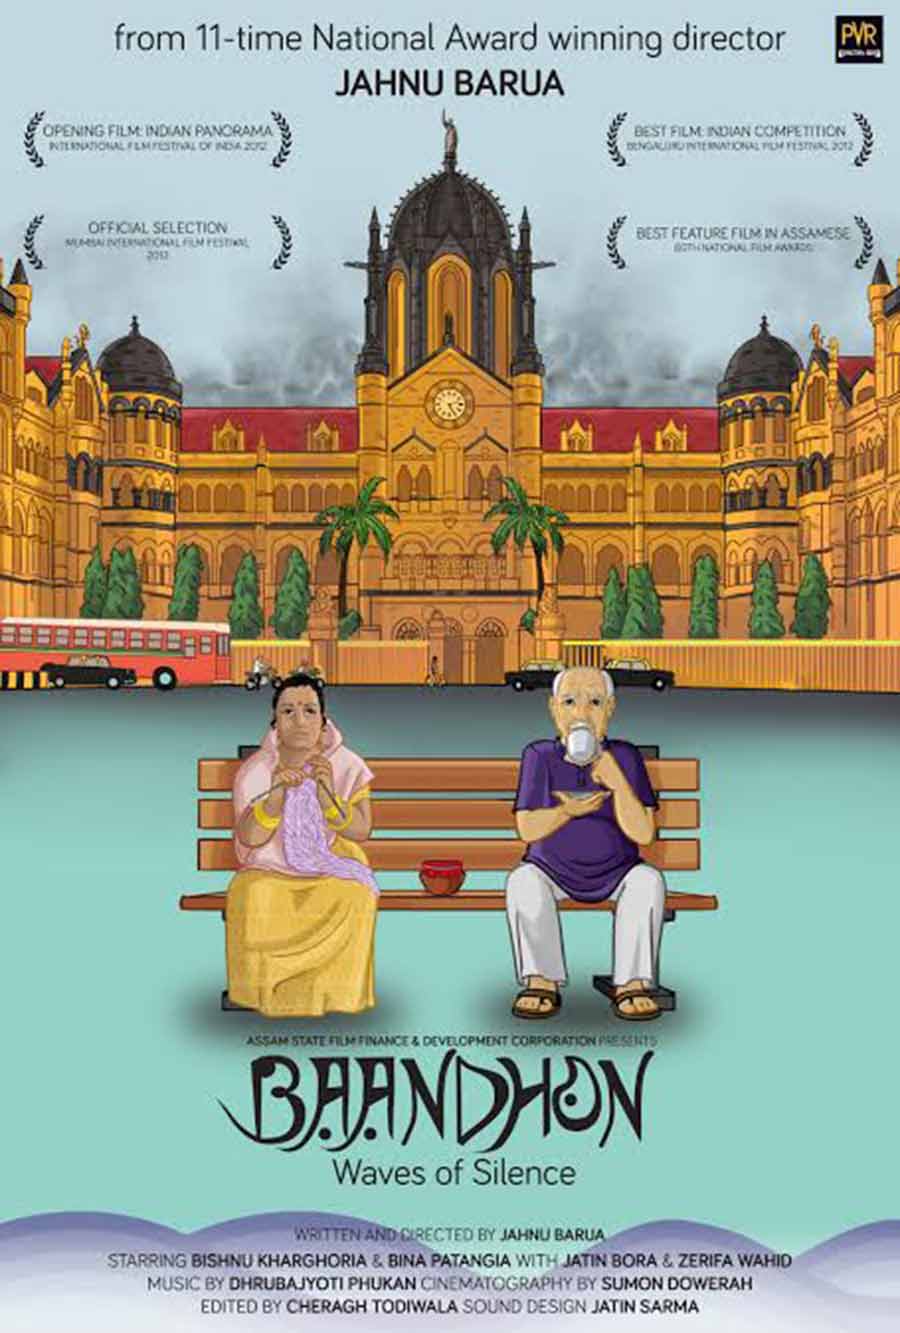 Baandhon (YouTube): Baandhon, by 11-time National Award winning-director Jahnu Barua, opened the feature film section of Indian Panorama at the 43rd International Film Festival of India in 2012. The story follows a married couple, Dandeswar and Hkawni, who arrive in Mumbai in search of their missing grandson Pona after the 26/11 terror attacks